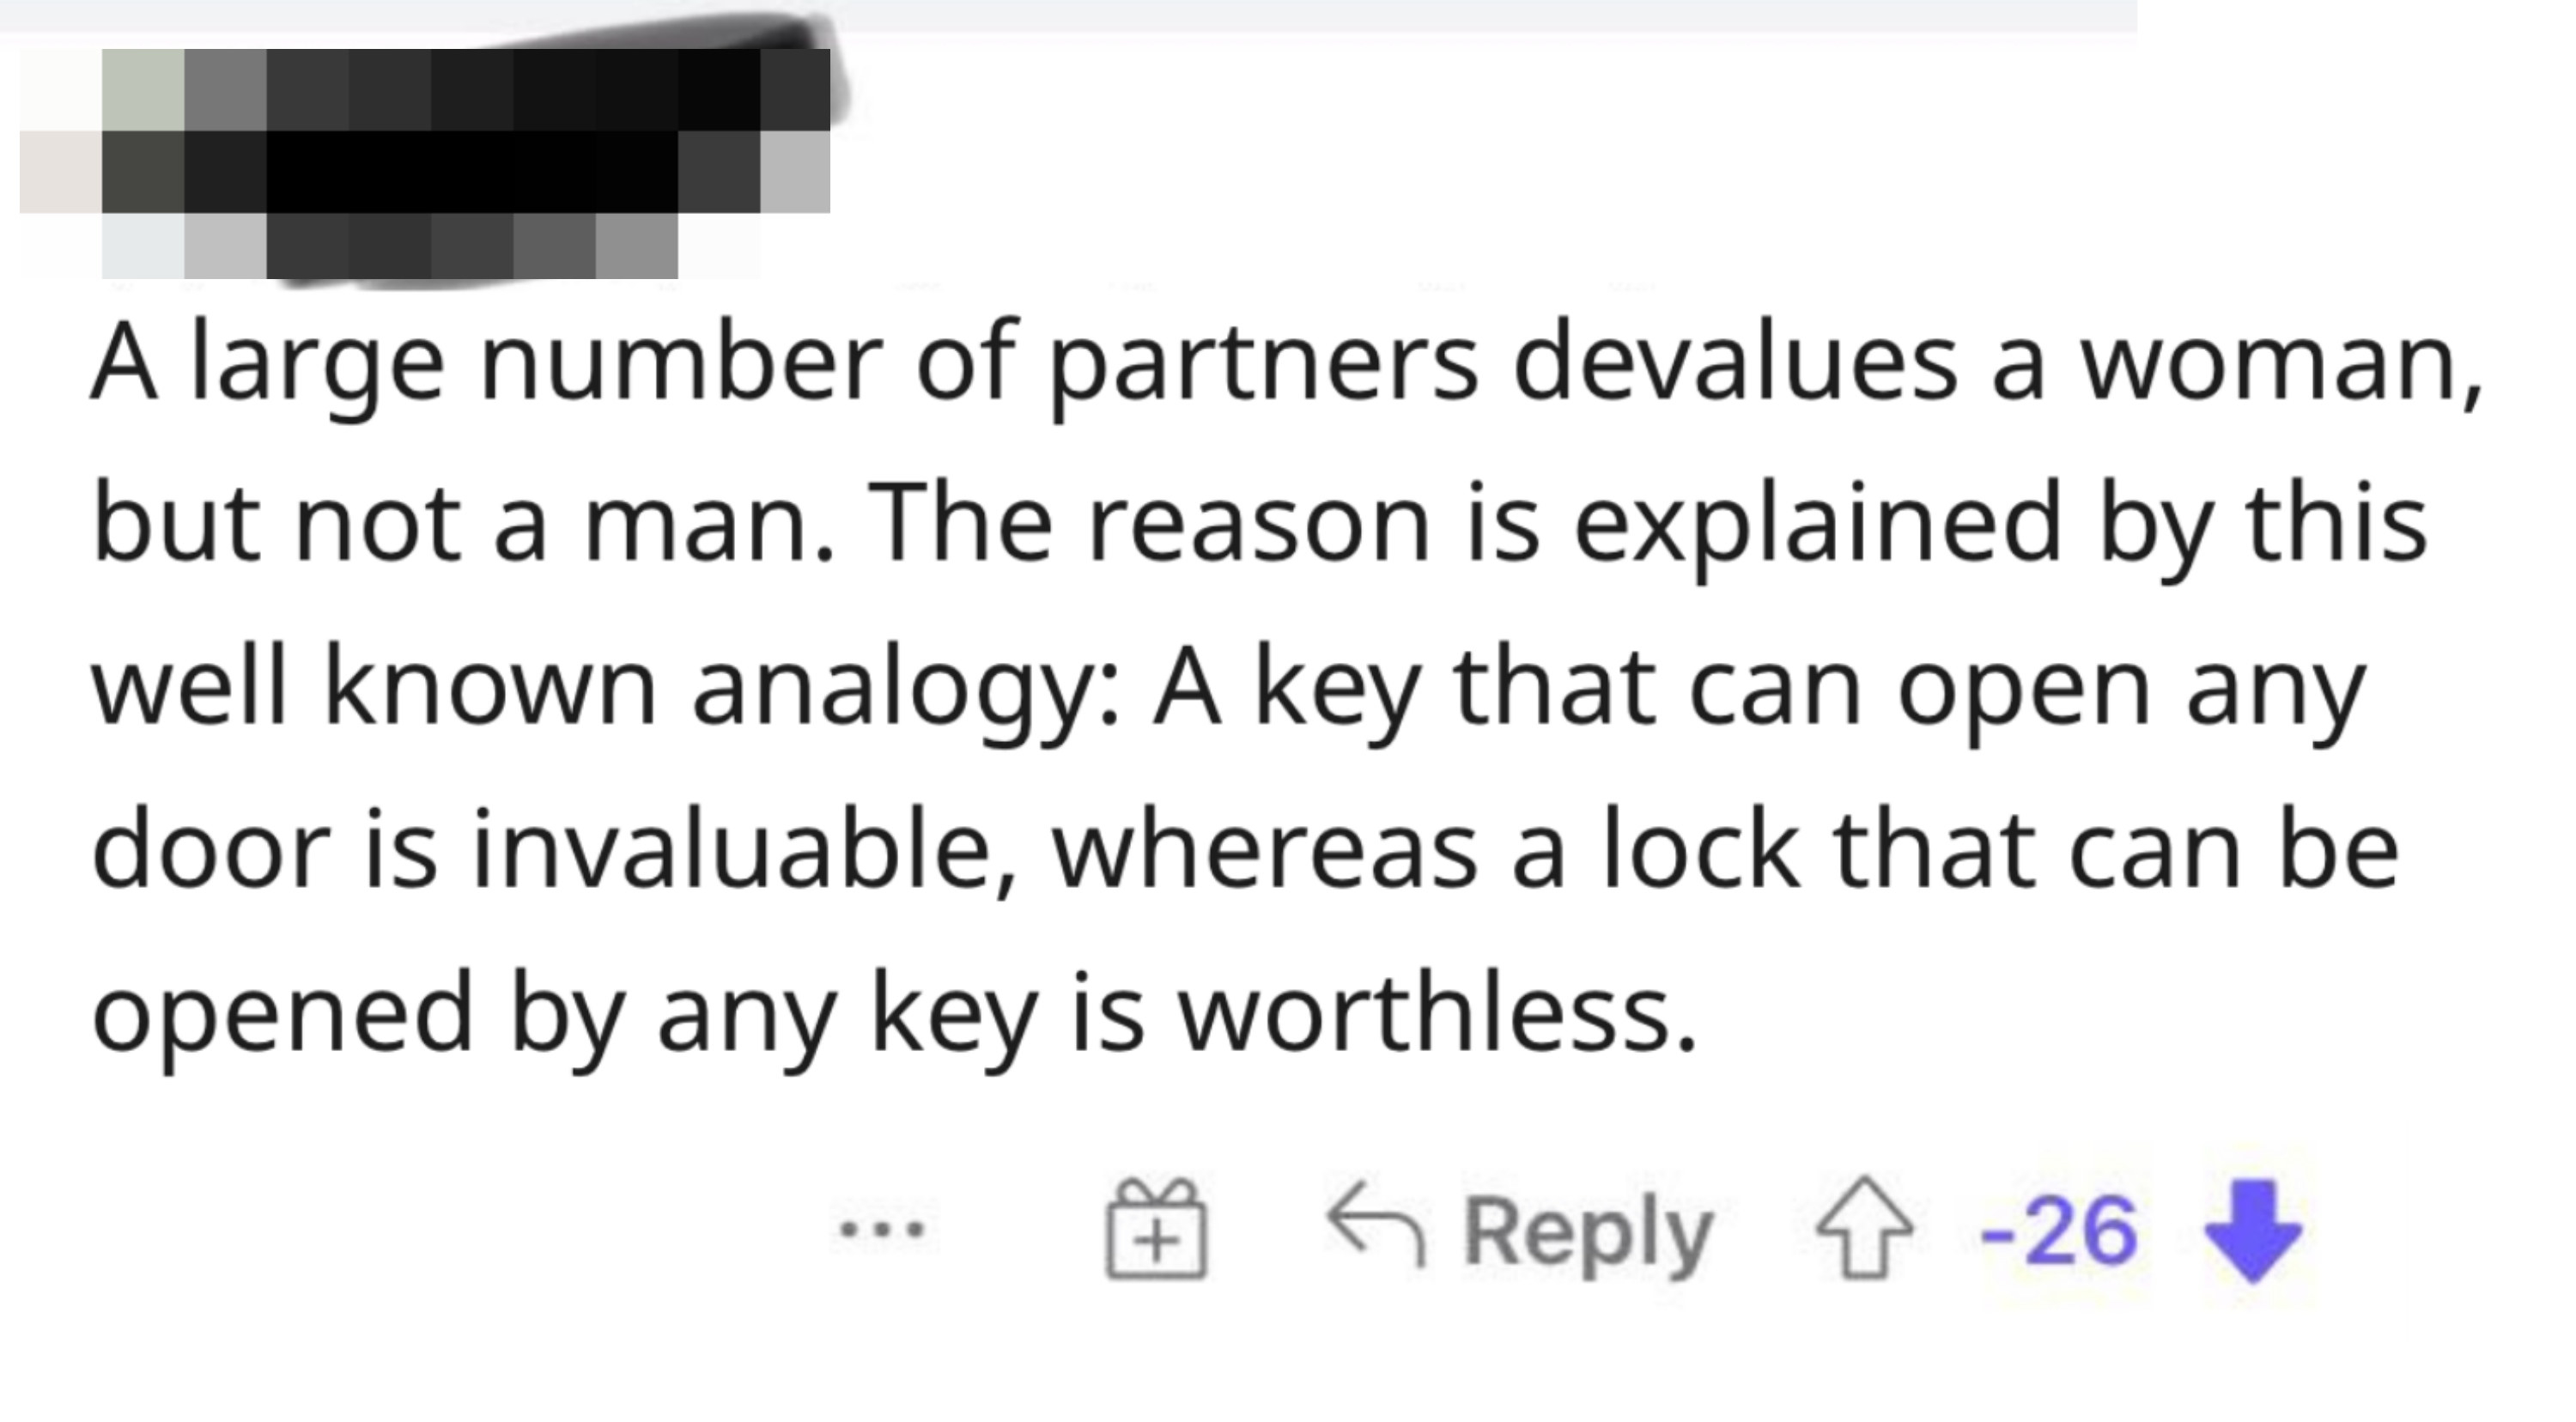 when talking about women&#x27;s sex lives a man says that a lock that can be opened by any key is worthless